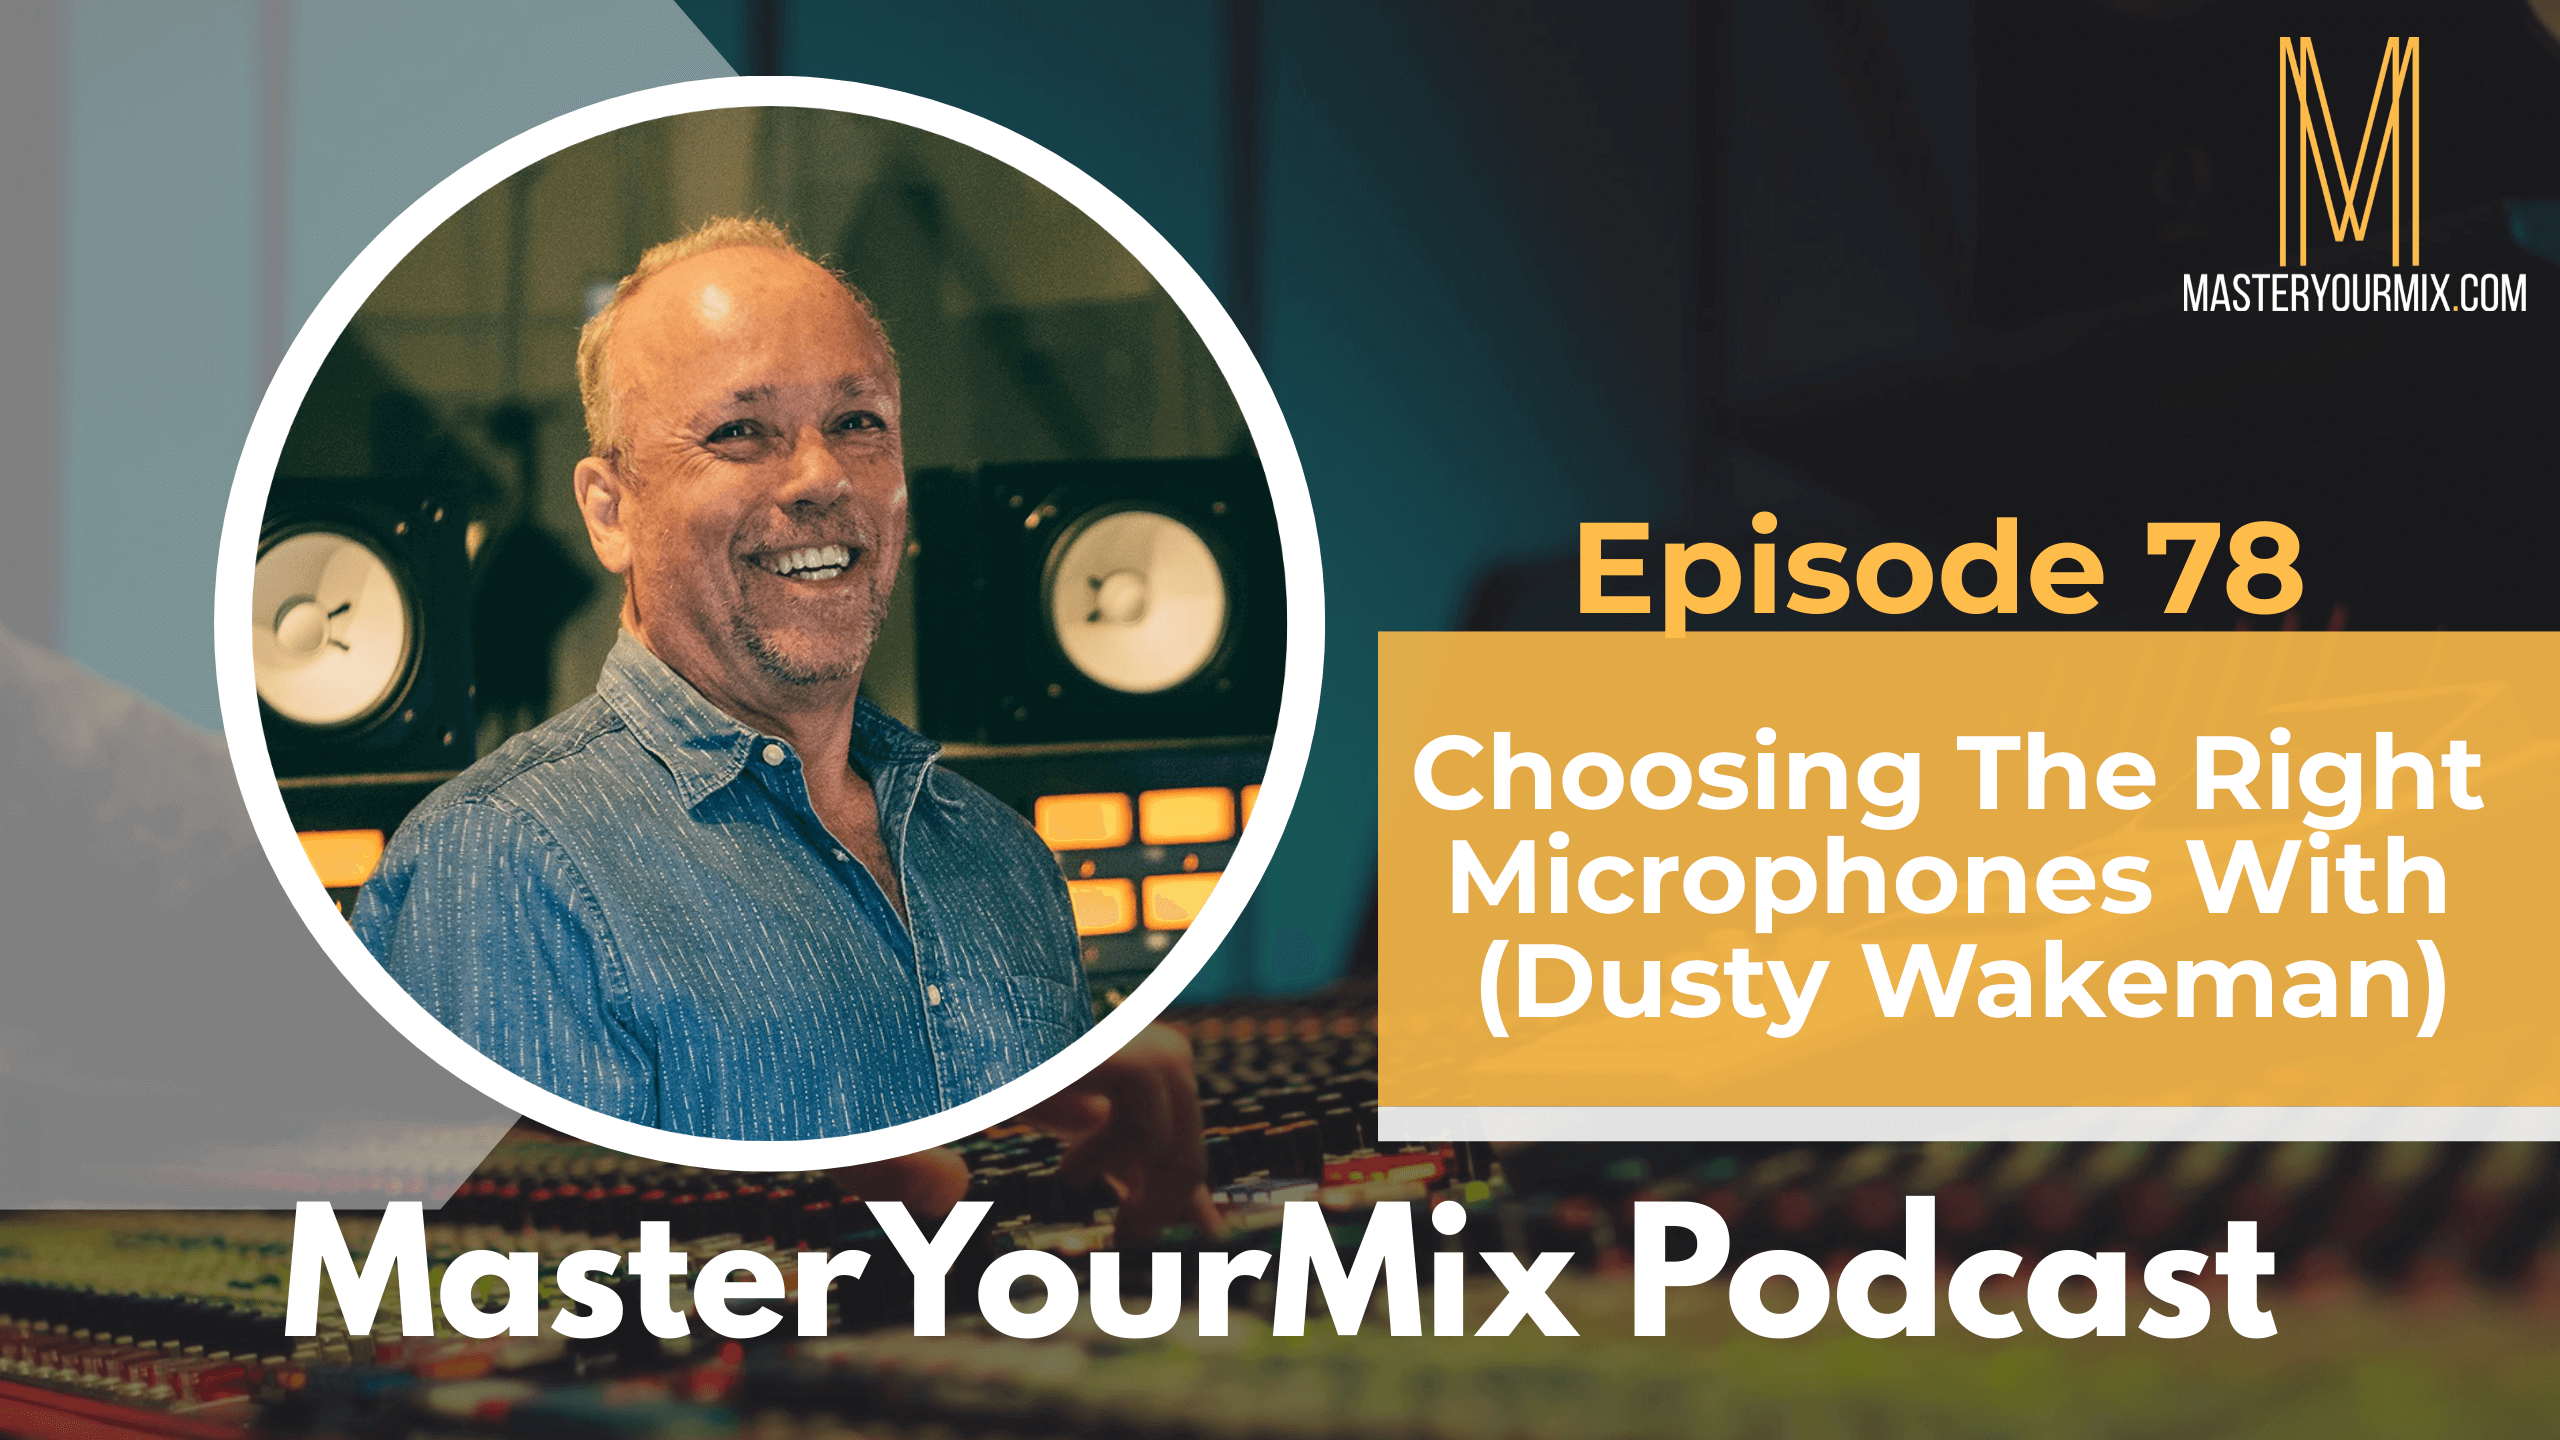 master your mix podcast, ep 78 dusty wakeman